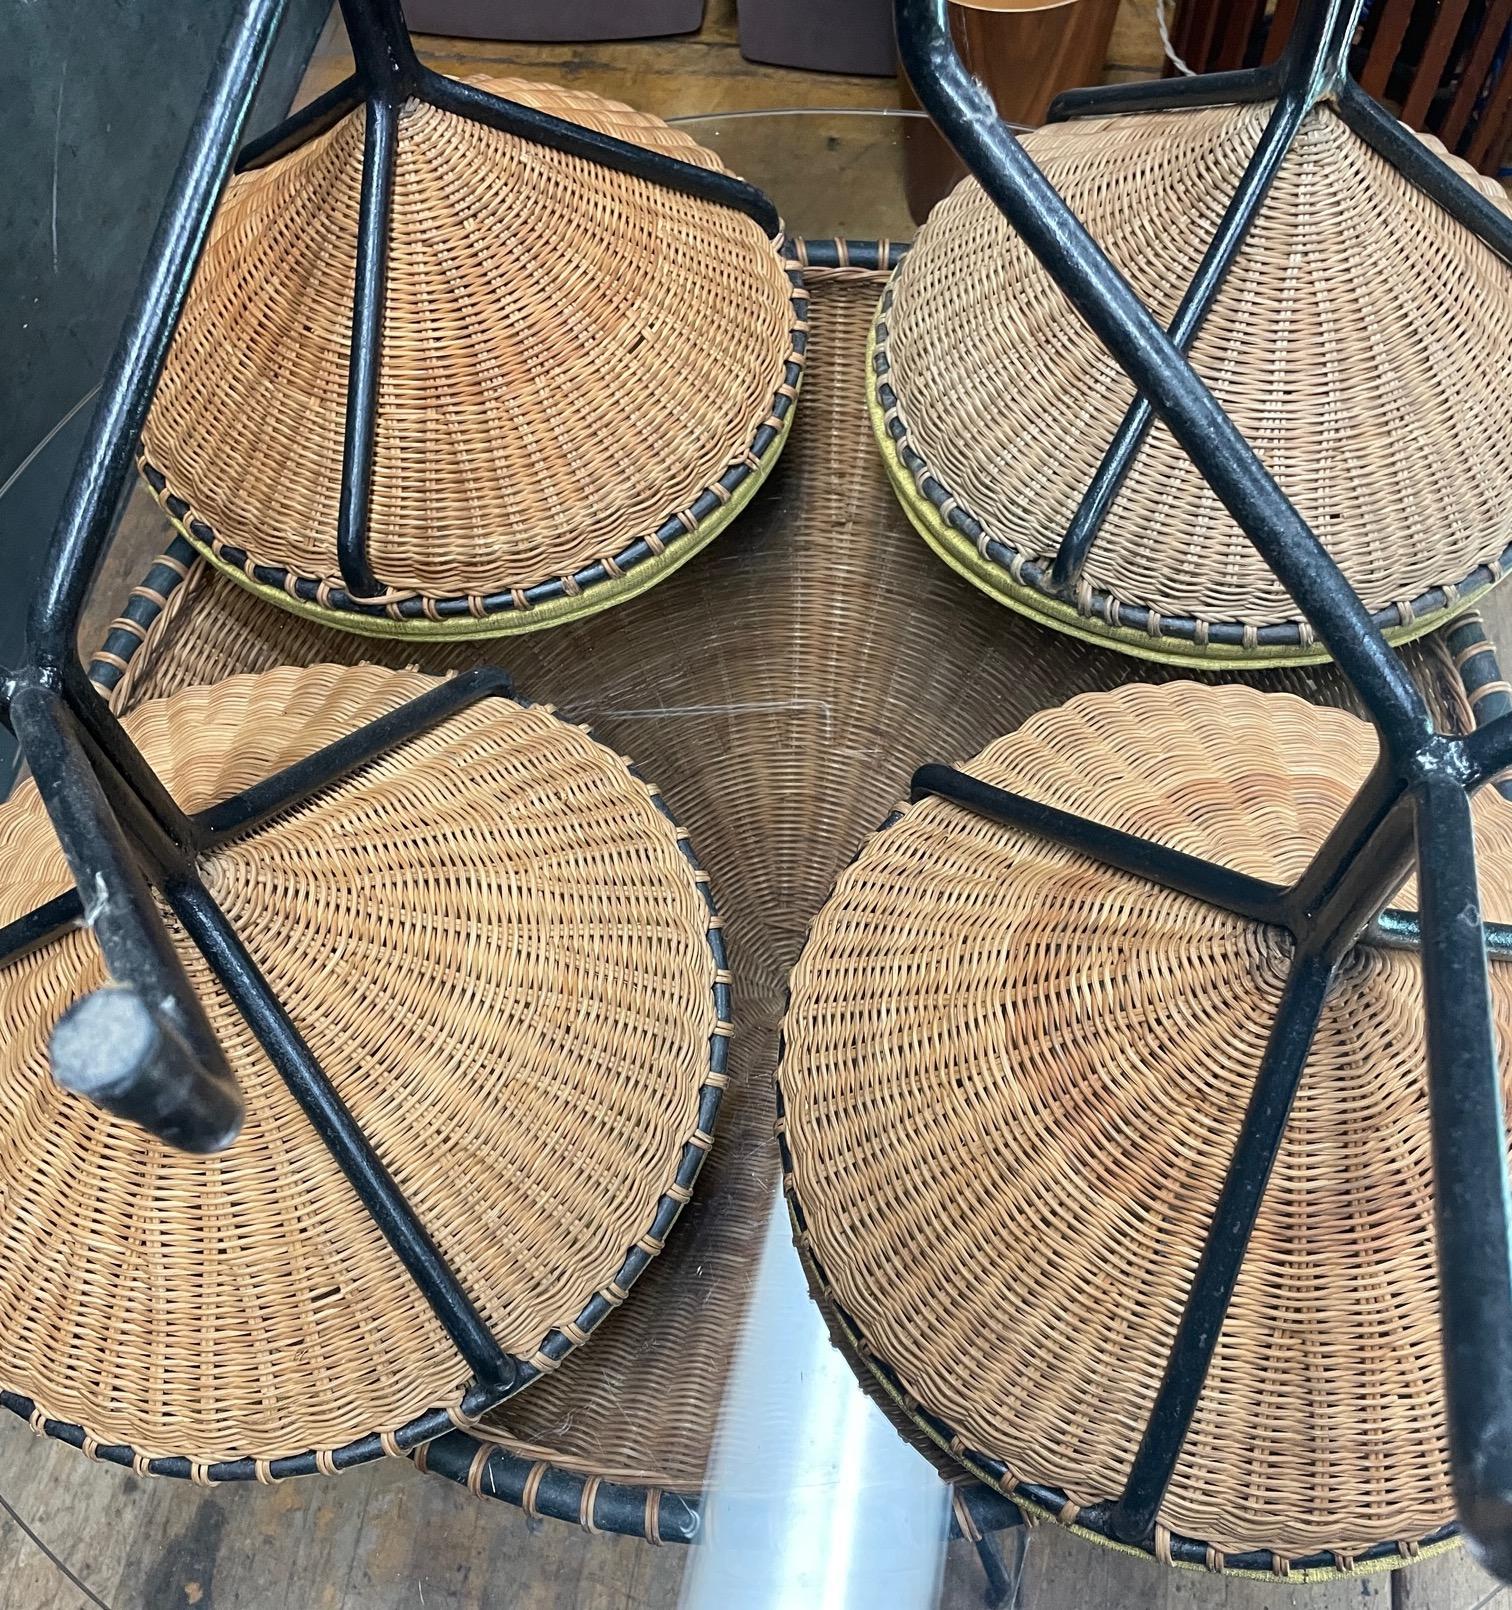 1950s California Design Danny Ho Fong Wicker Iron Tiki Dining Table Stool Set For Sale 3